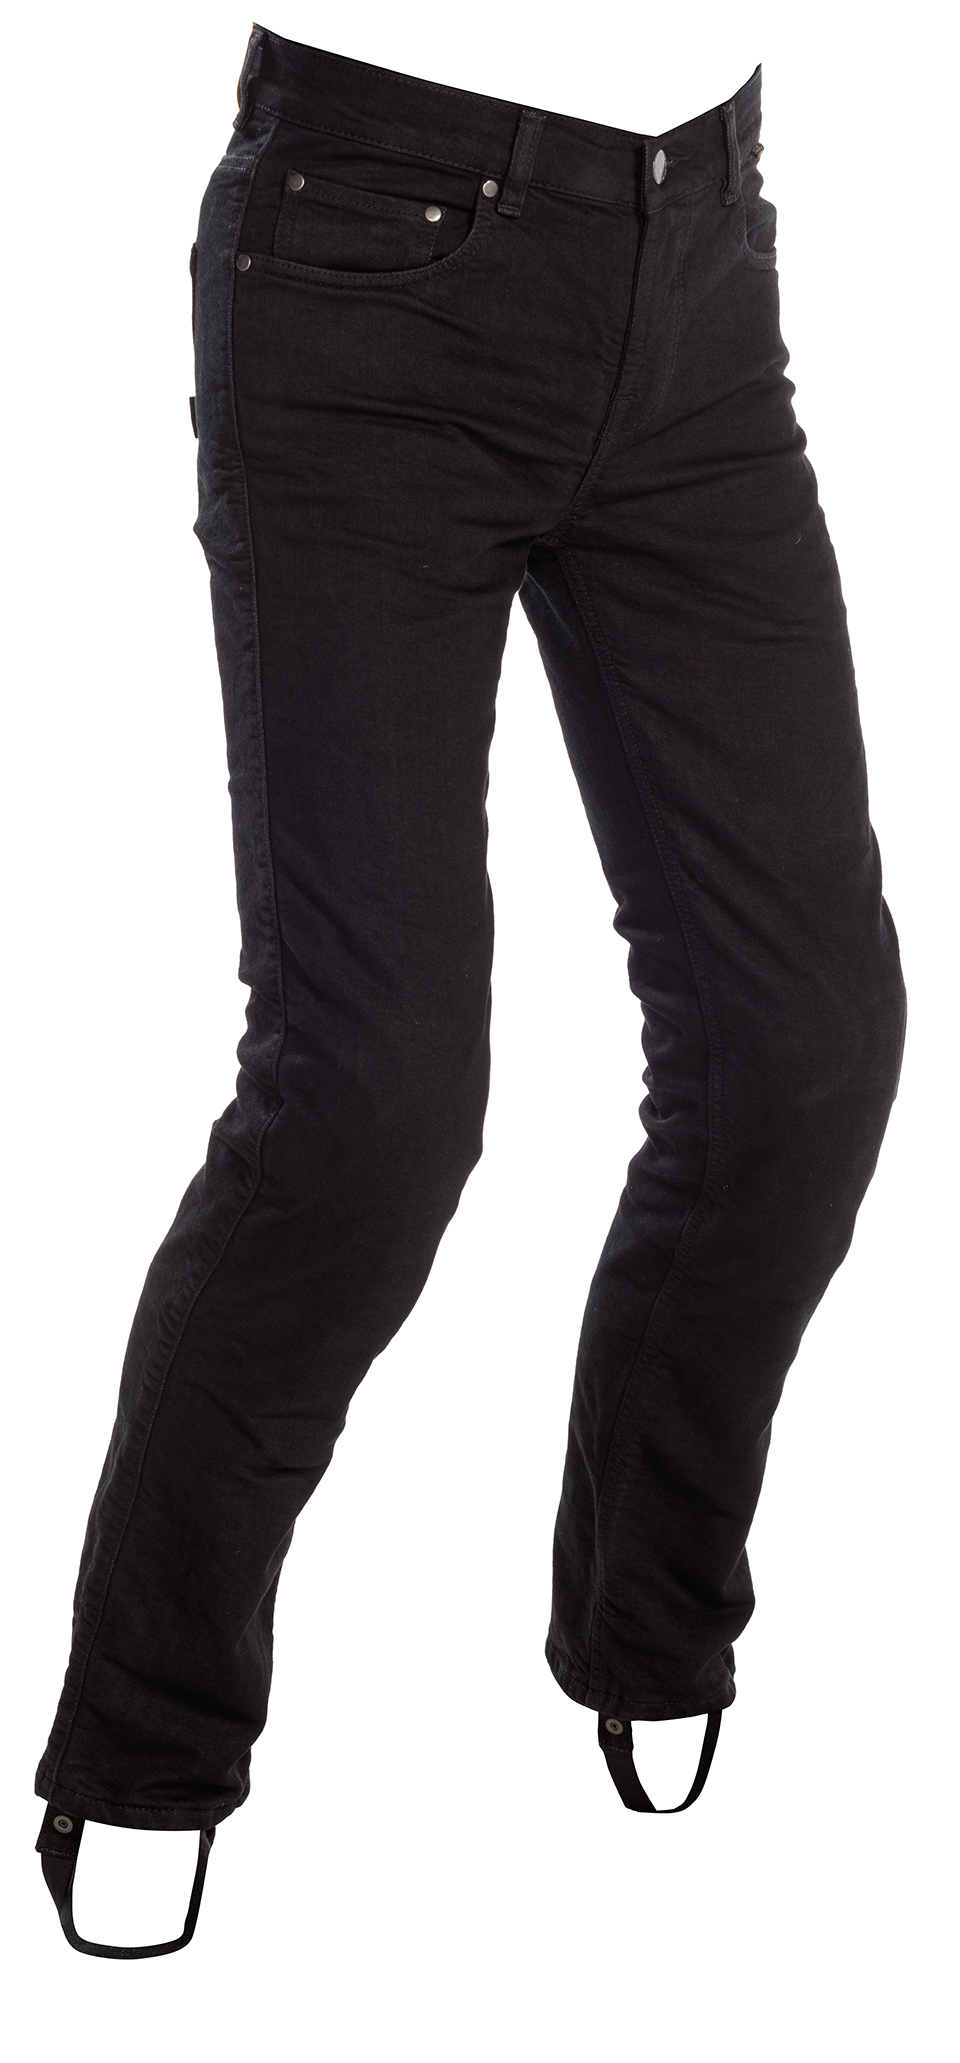 Richa introduces slimfit jeans to its current lineup Motorcycle News